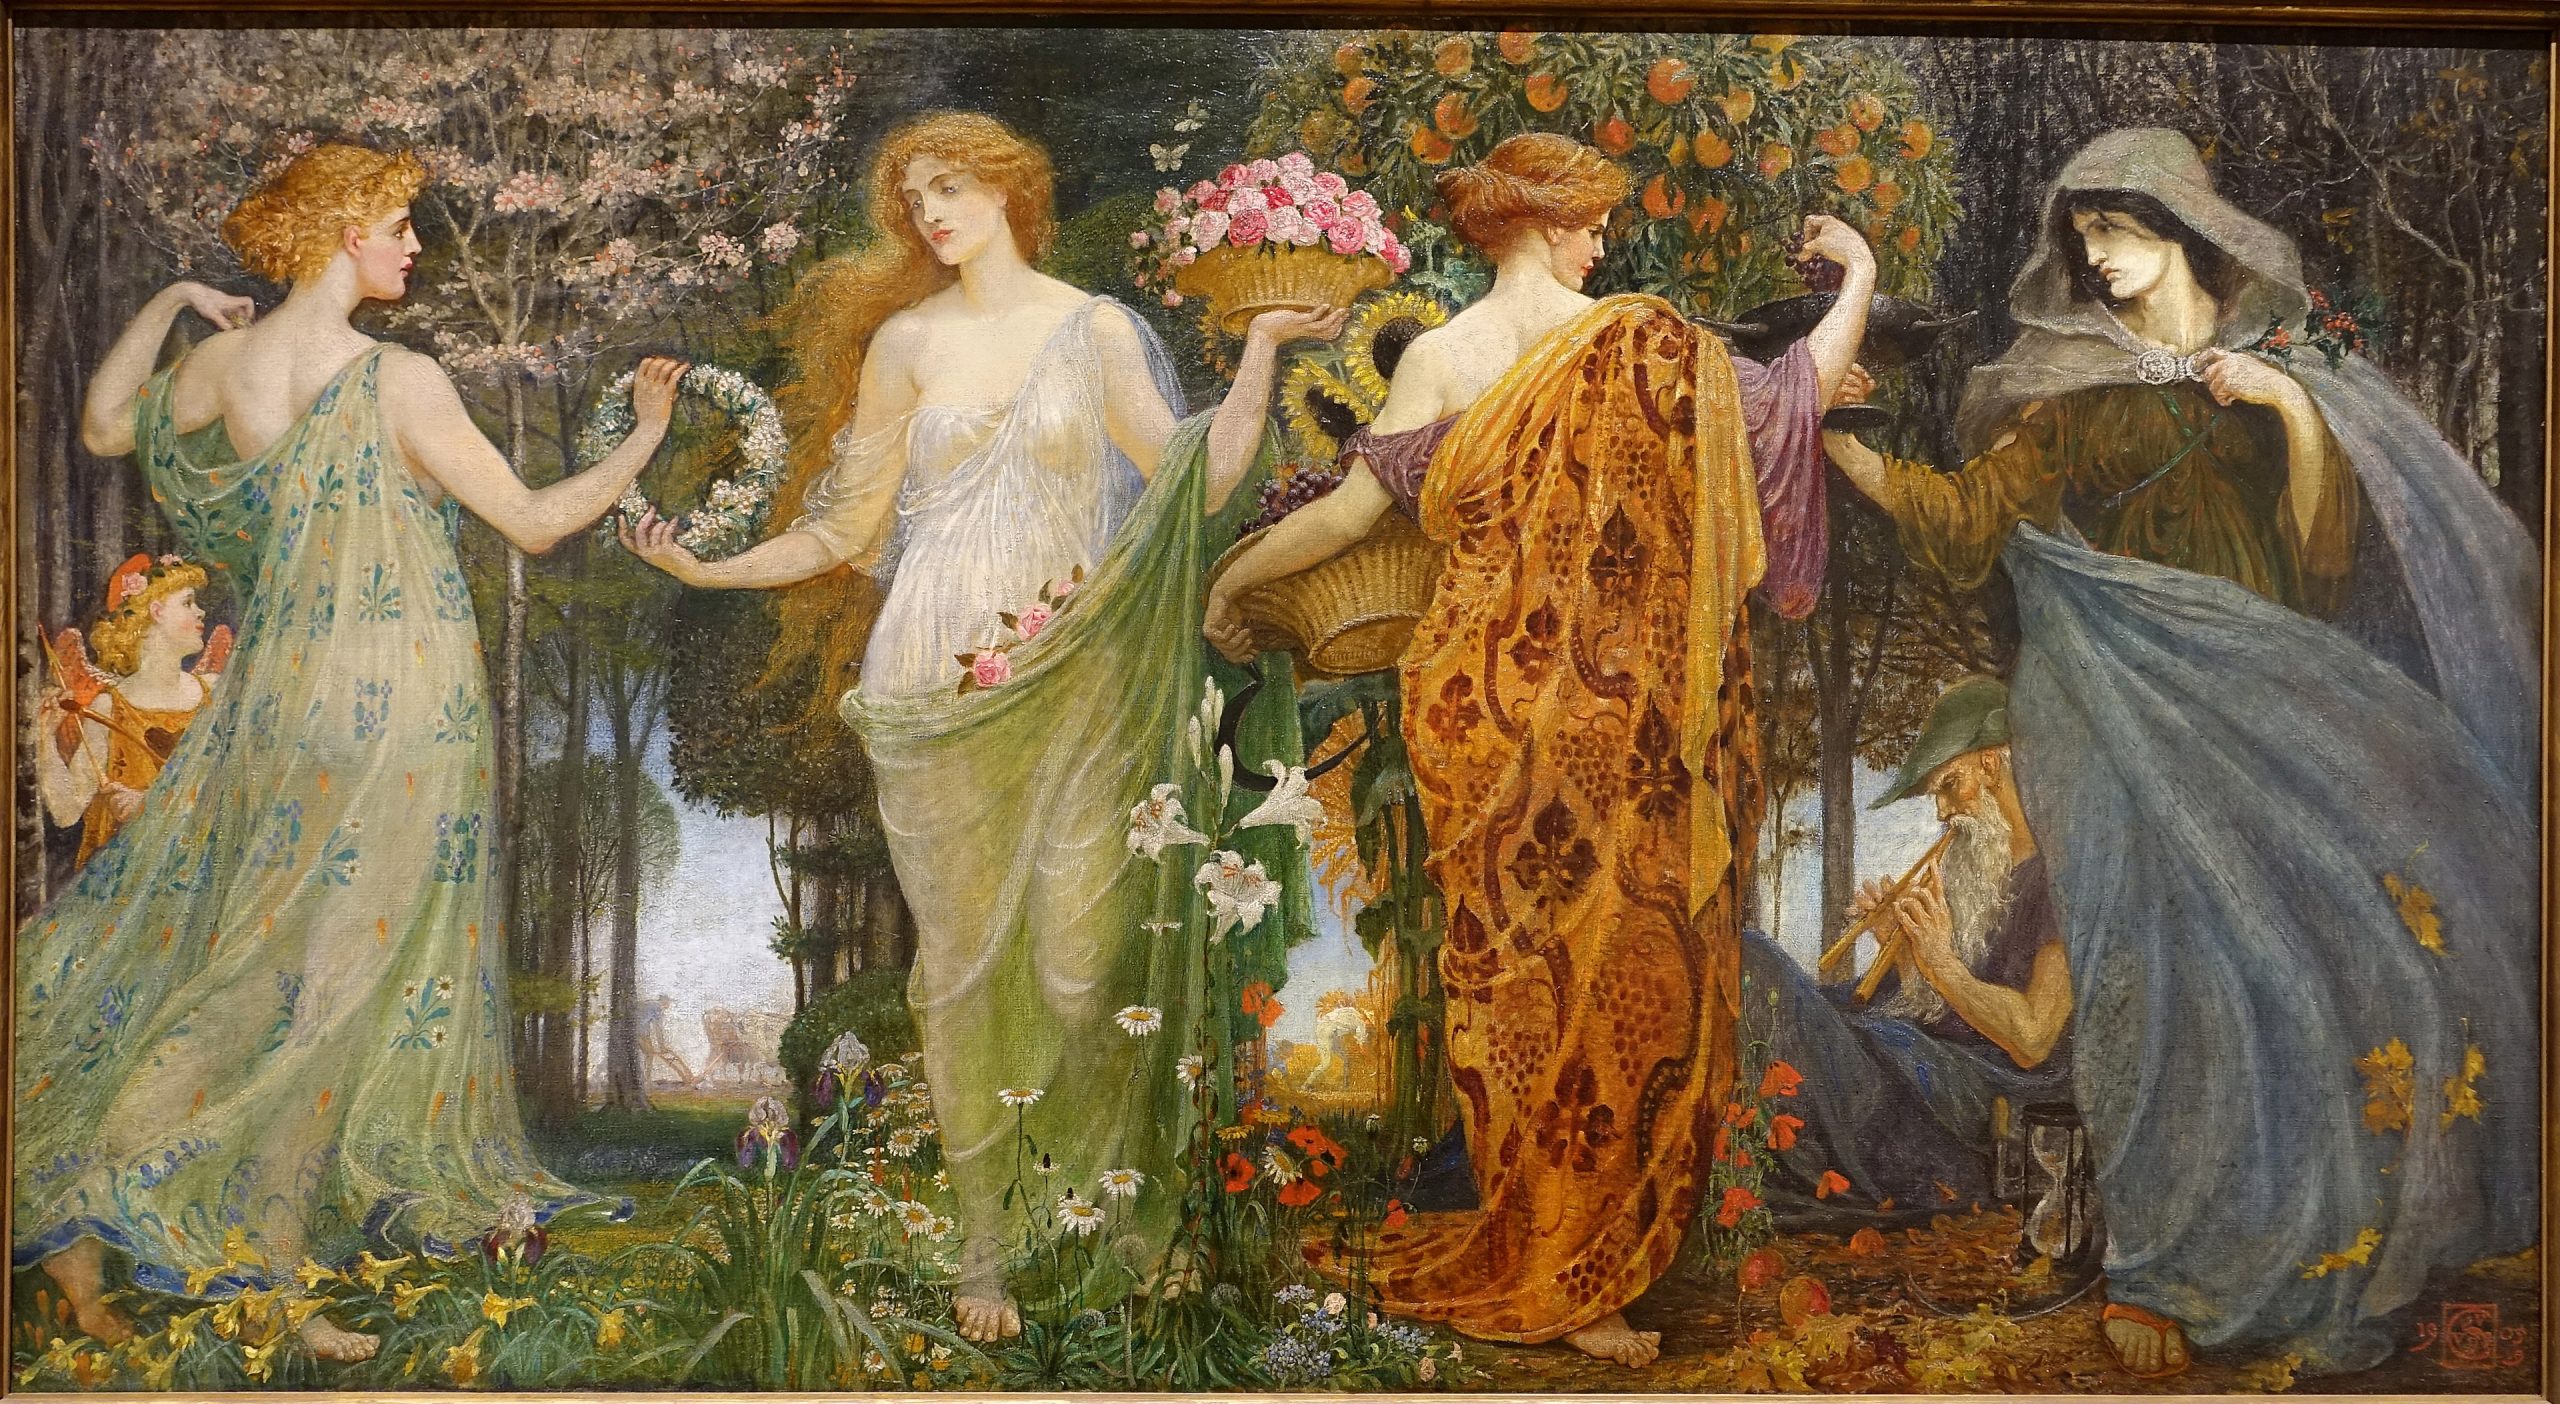 Four women personifying the seasons pass flowers over to one another by a group of trees